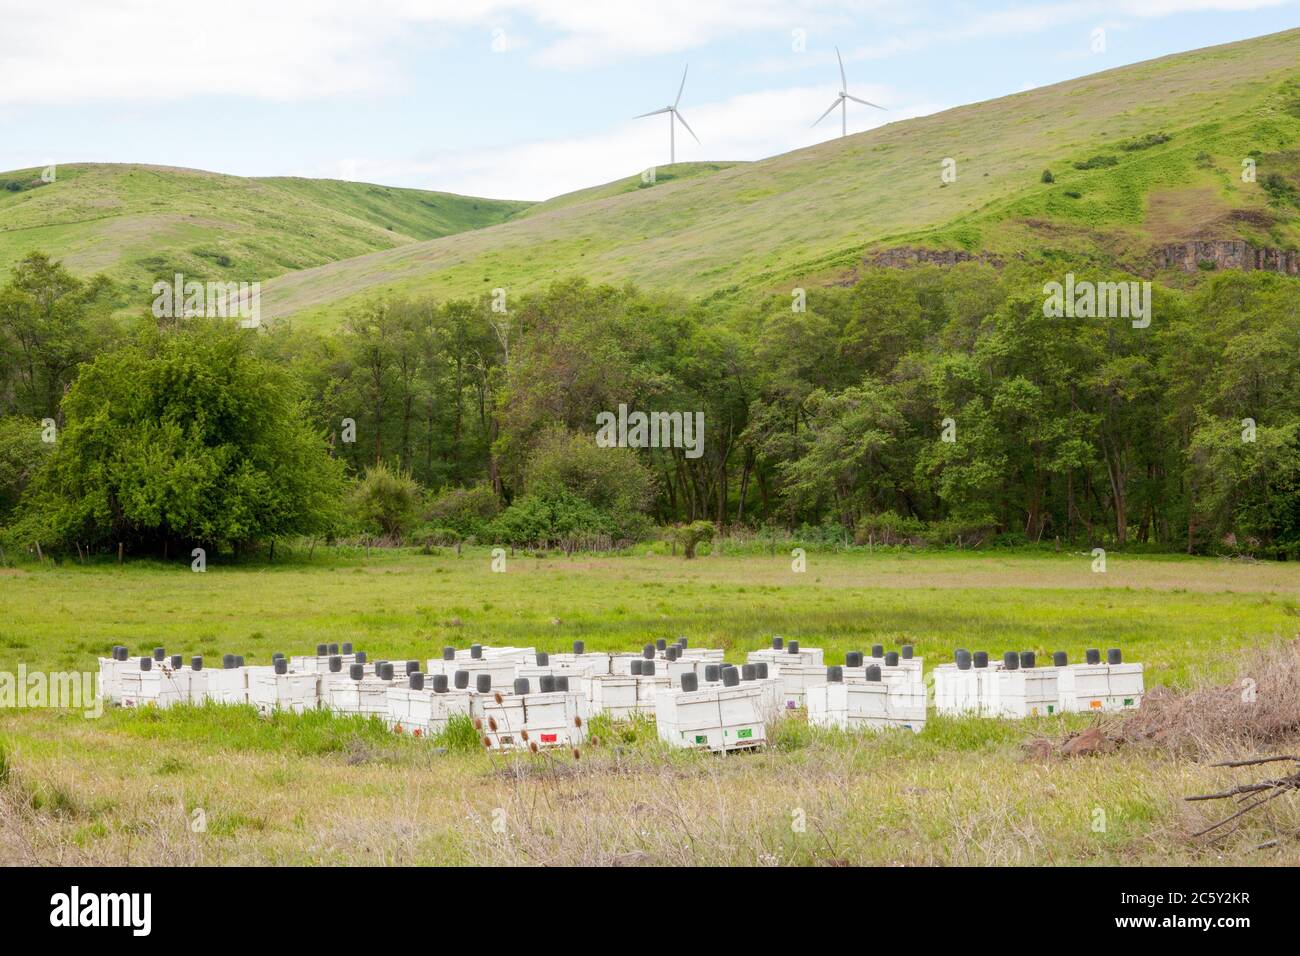 Beehive colony with bee feeder jars on top of each hive, in a farmer's field with wind turbines on top of a hill, near Pomery, Washington, USA. Stock Photo